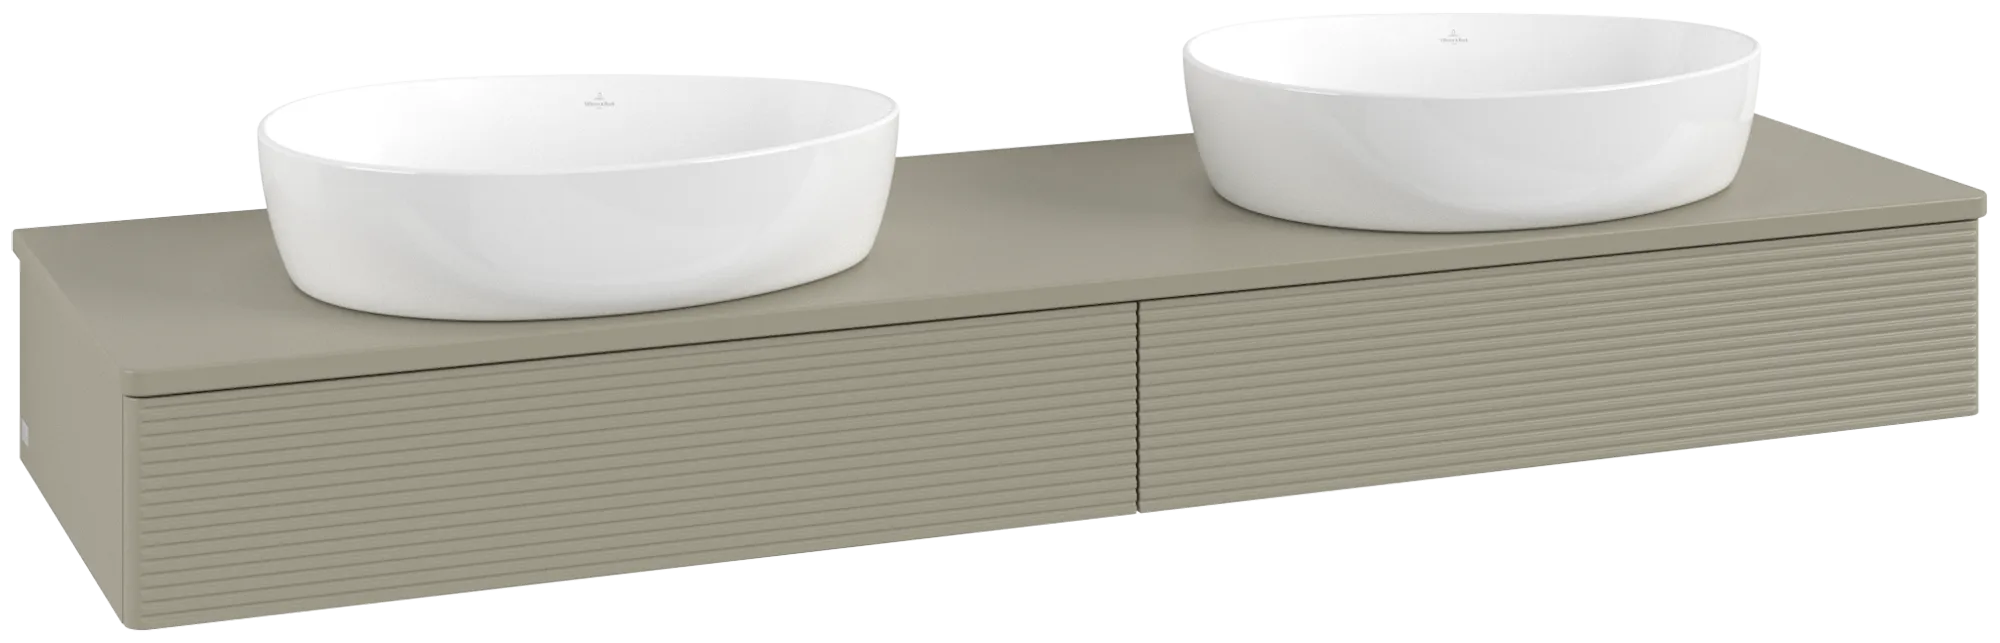 VILLEROY BOCH Antao Vanity unit, 2 pull-out compartments, 1600 x 190 x 500 mm, Front with grain texture, Stone Grey Matt Lacquer / Stone Grey Matt Lacquer #K17150HK resmi